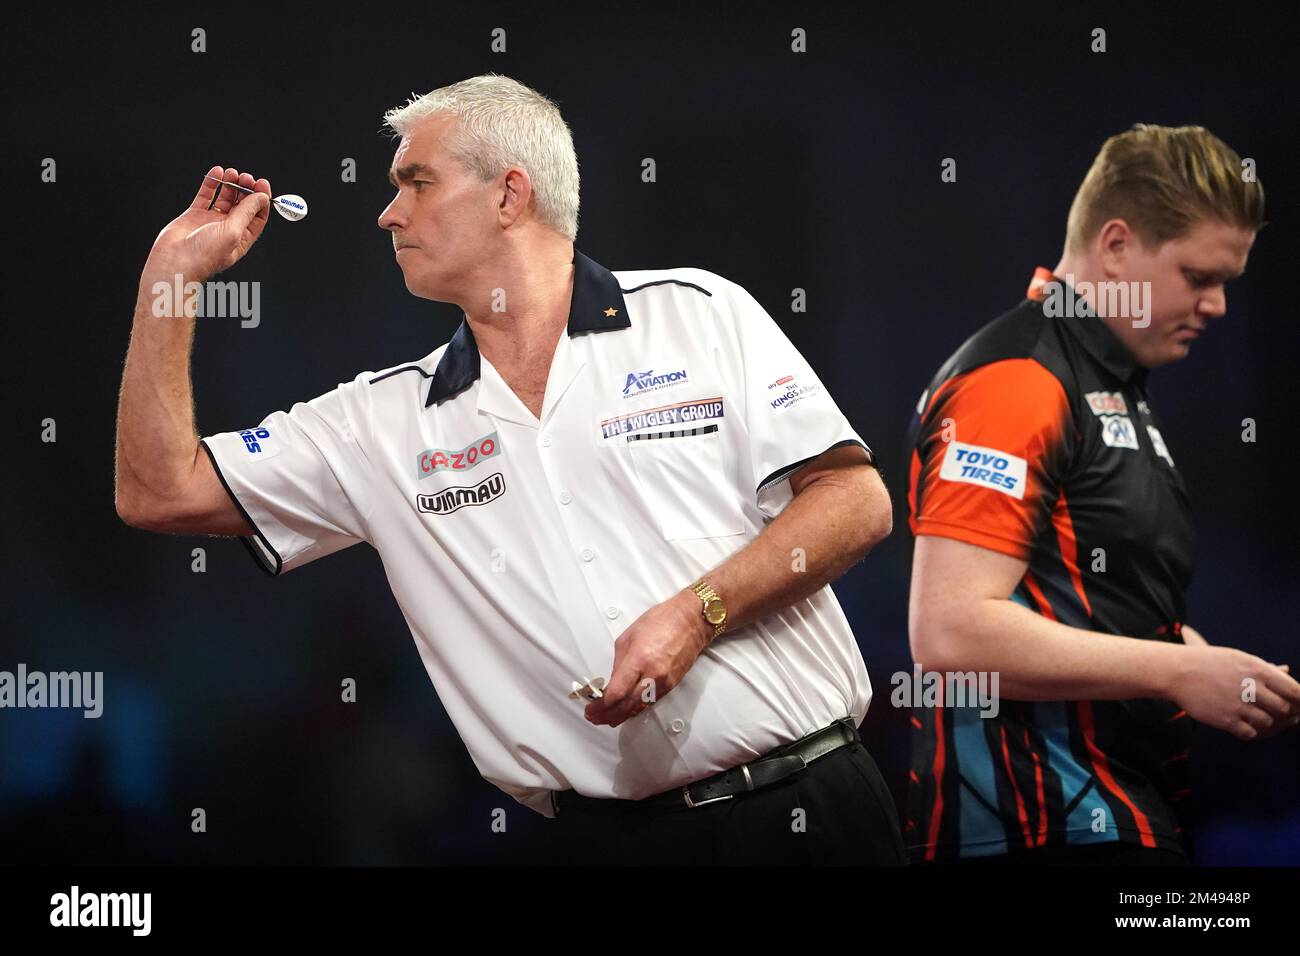 England's Steve Beaton in action against Netherland's Danny van Trijp during day five of the Cazoo World Darts Championship at Palace, London. Picture date: Monday December 2022 Stock Photo - Alamy